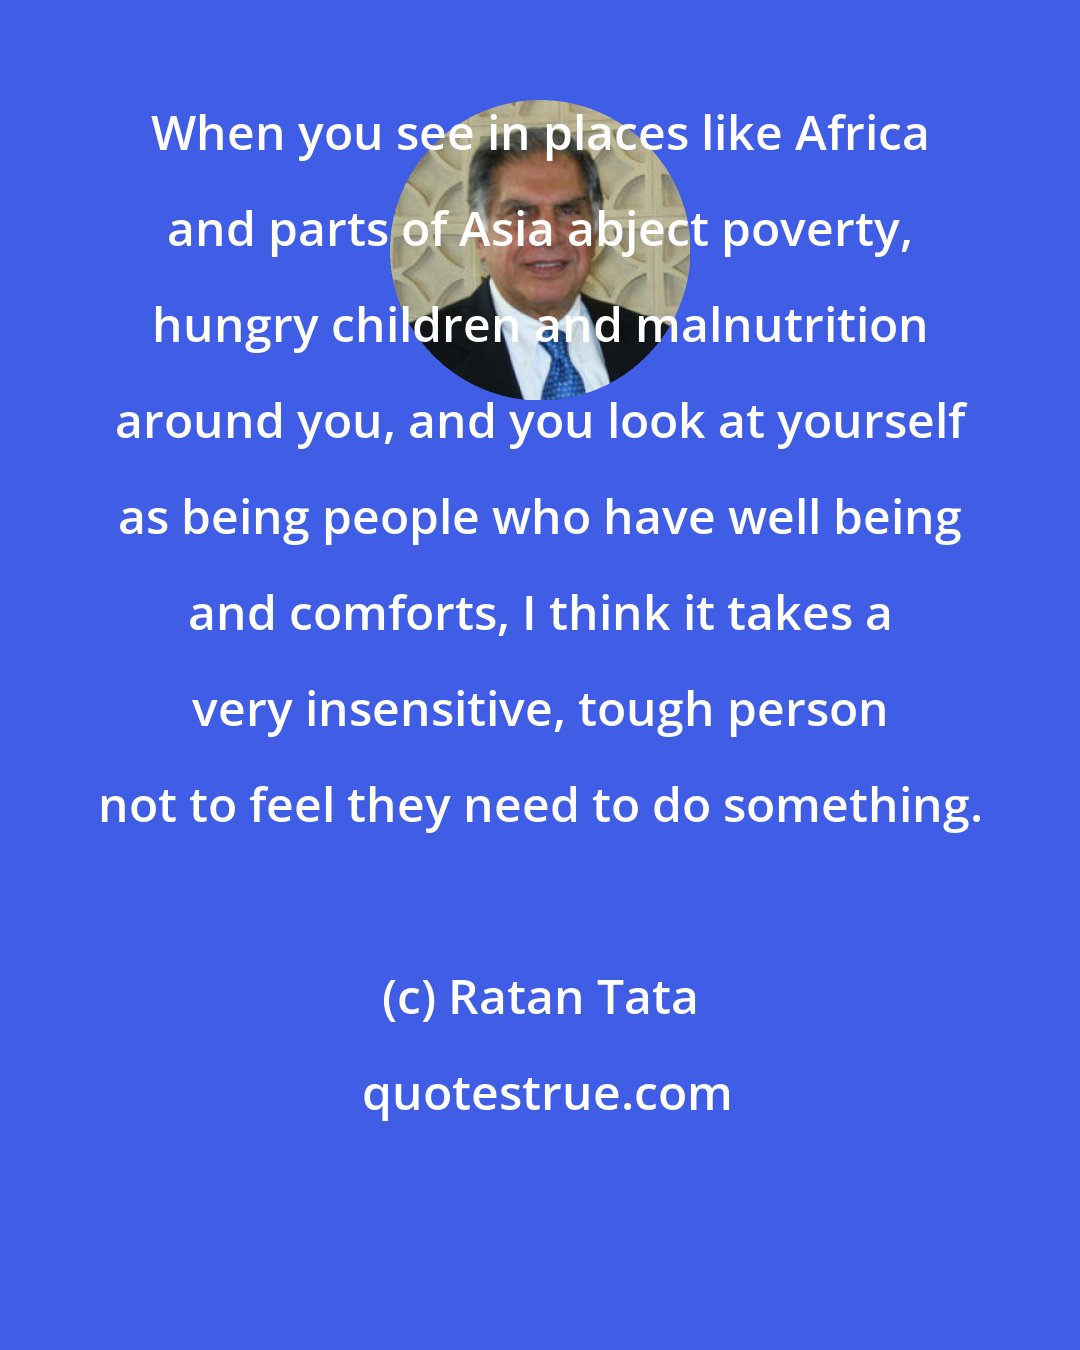 Ratan Tata: When you see in places like Africa and parts of Asia abject poverty, hungry children and malnutrition around you, and you look at yourself as being people who have well being and comforts, I think it takes a very insensitive, tough person not to feel they need to do something.